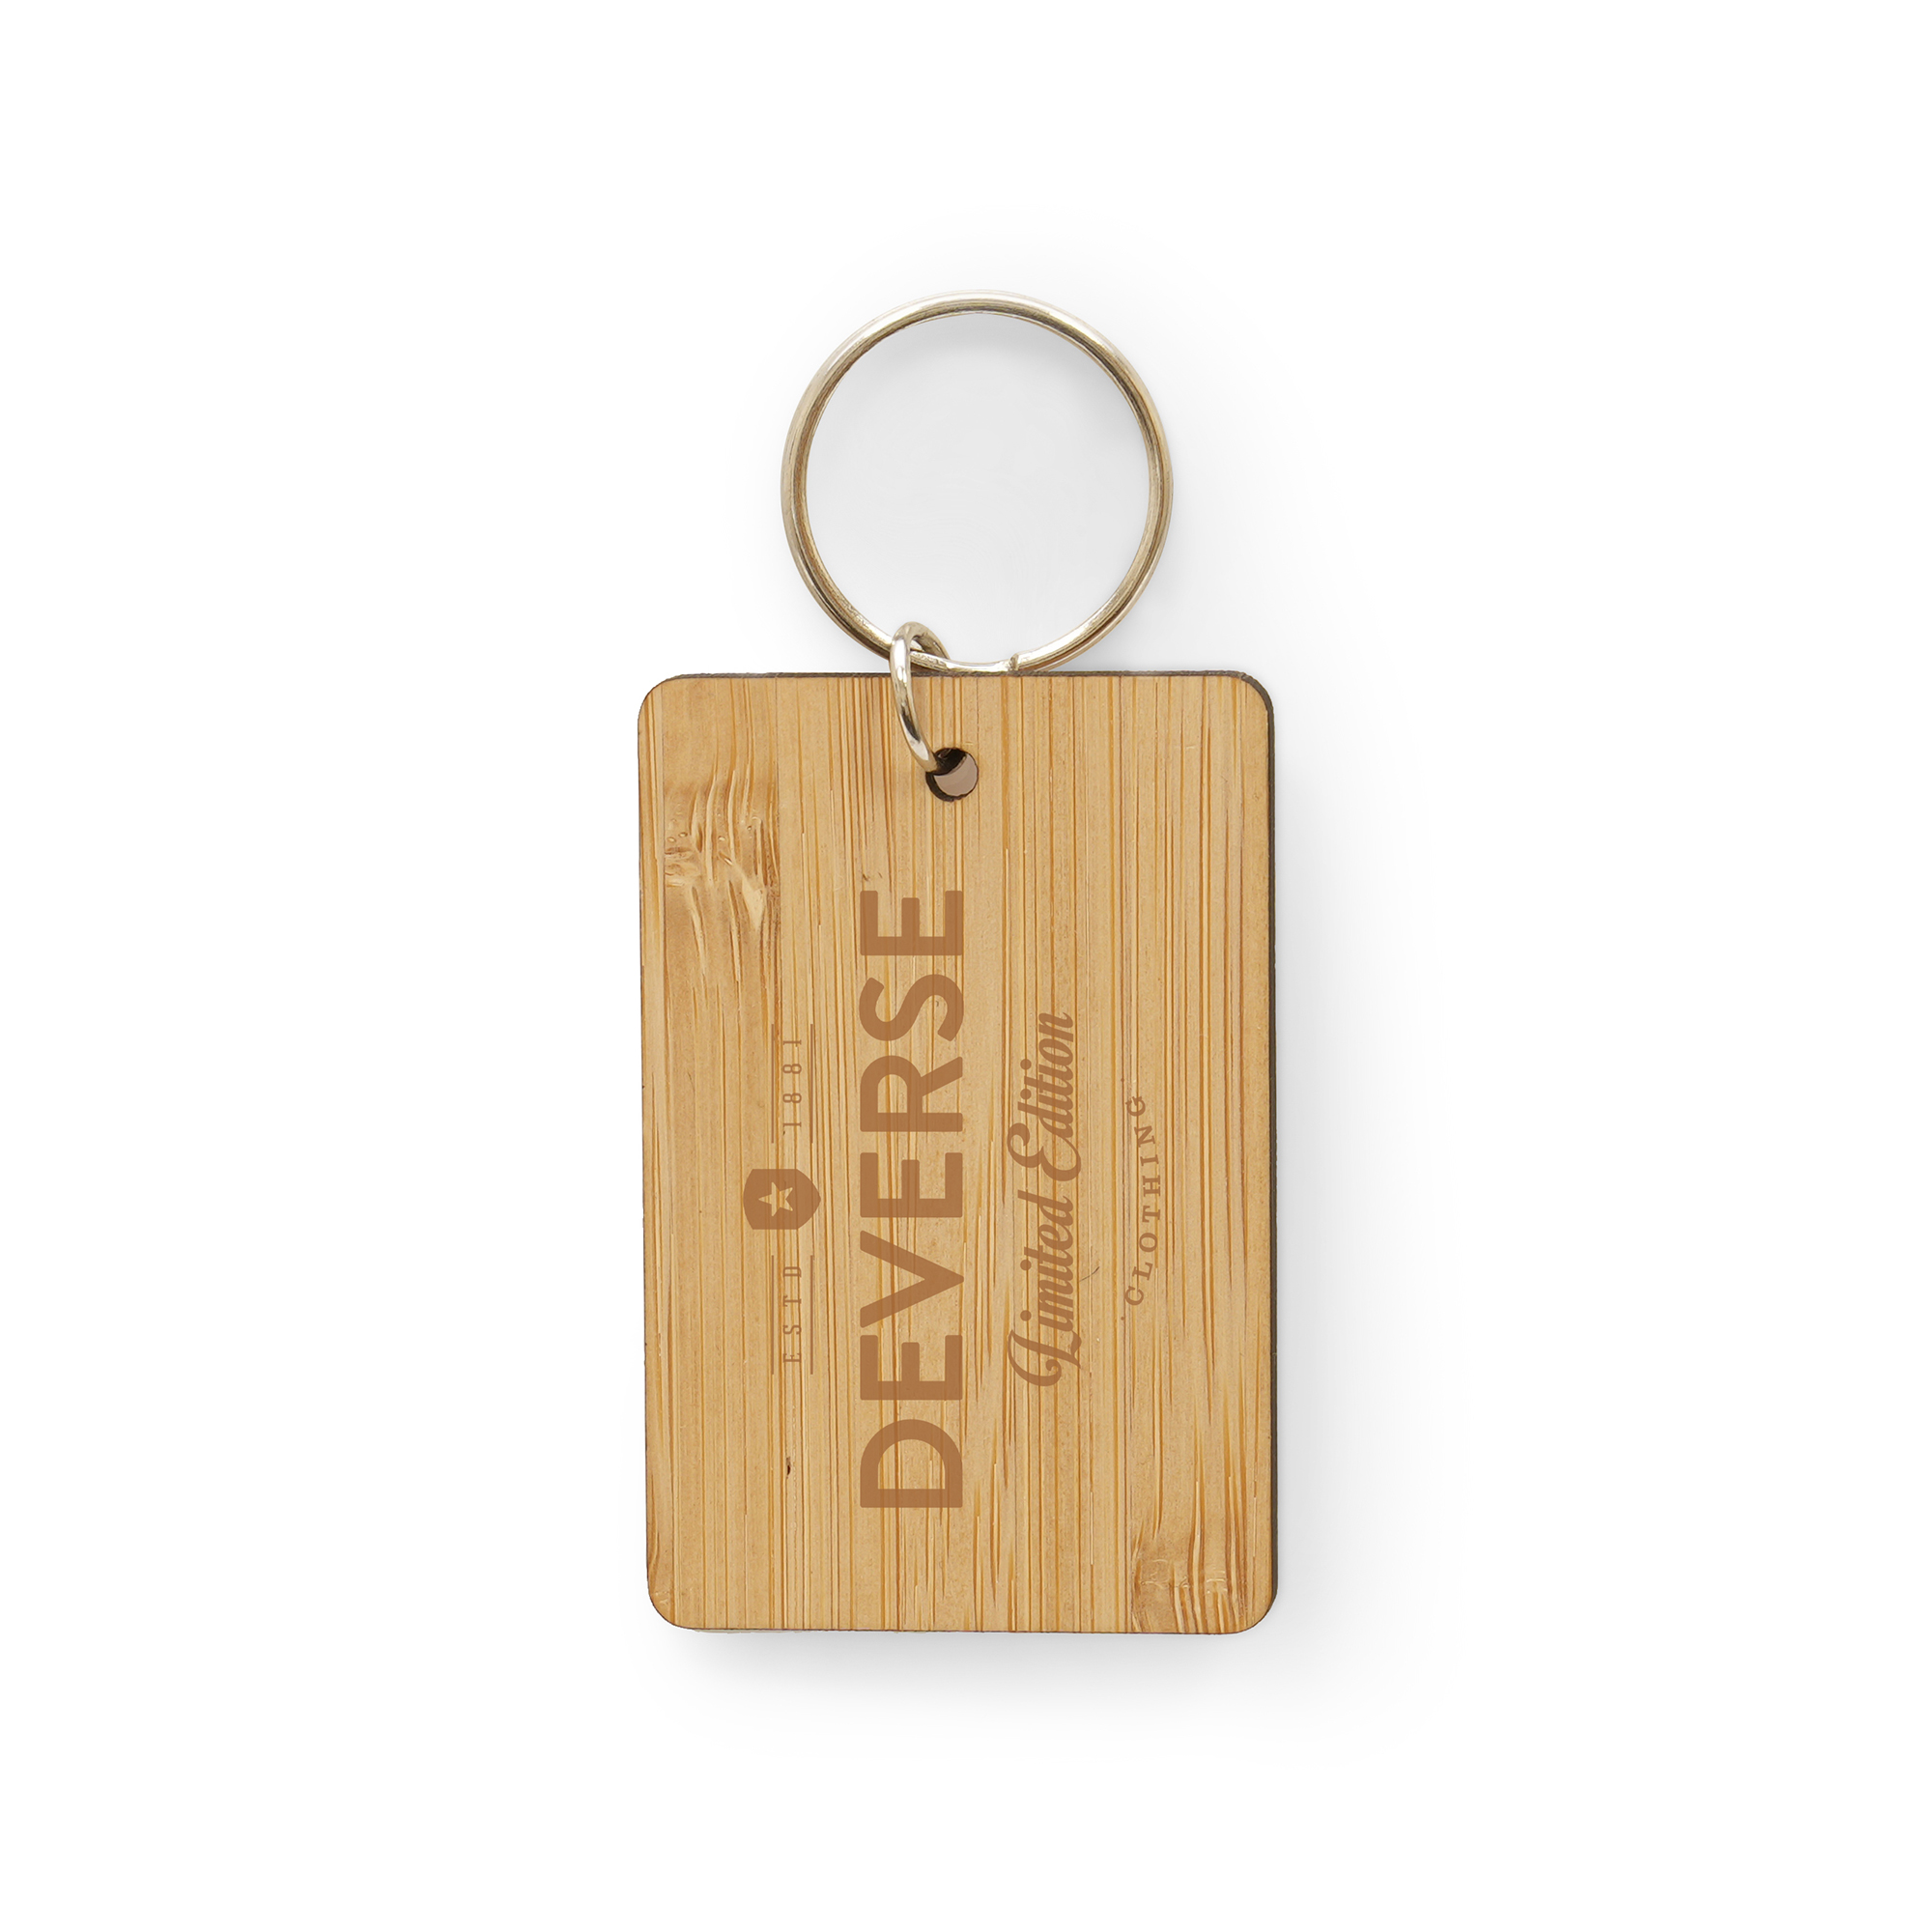 3mm bamboo rectangular keyring with split ring attachment.